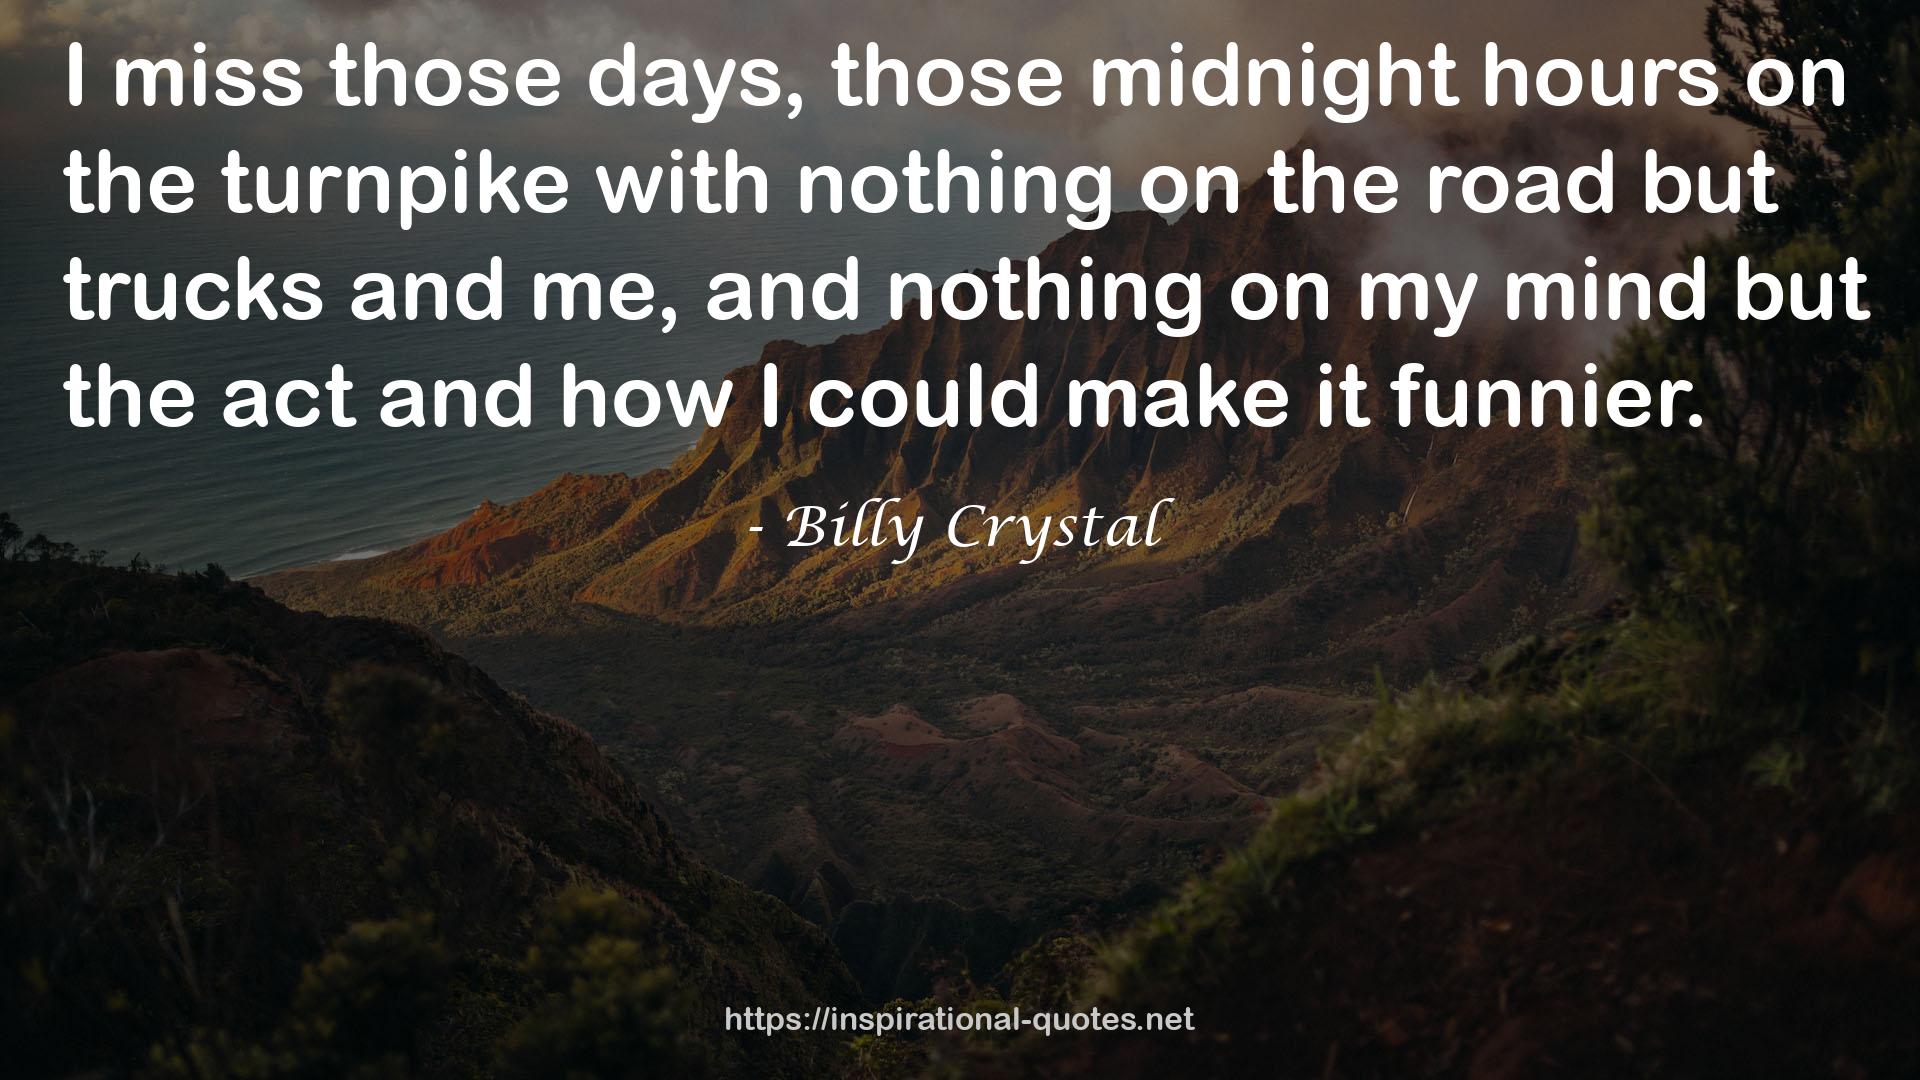 Billy Crystal QUOTES